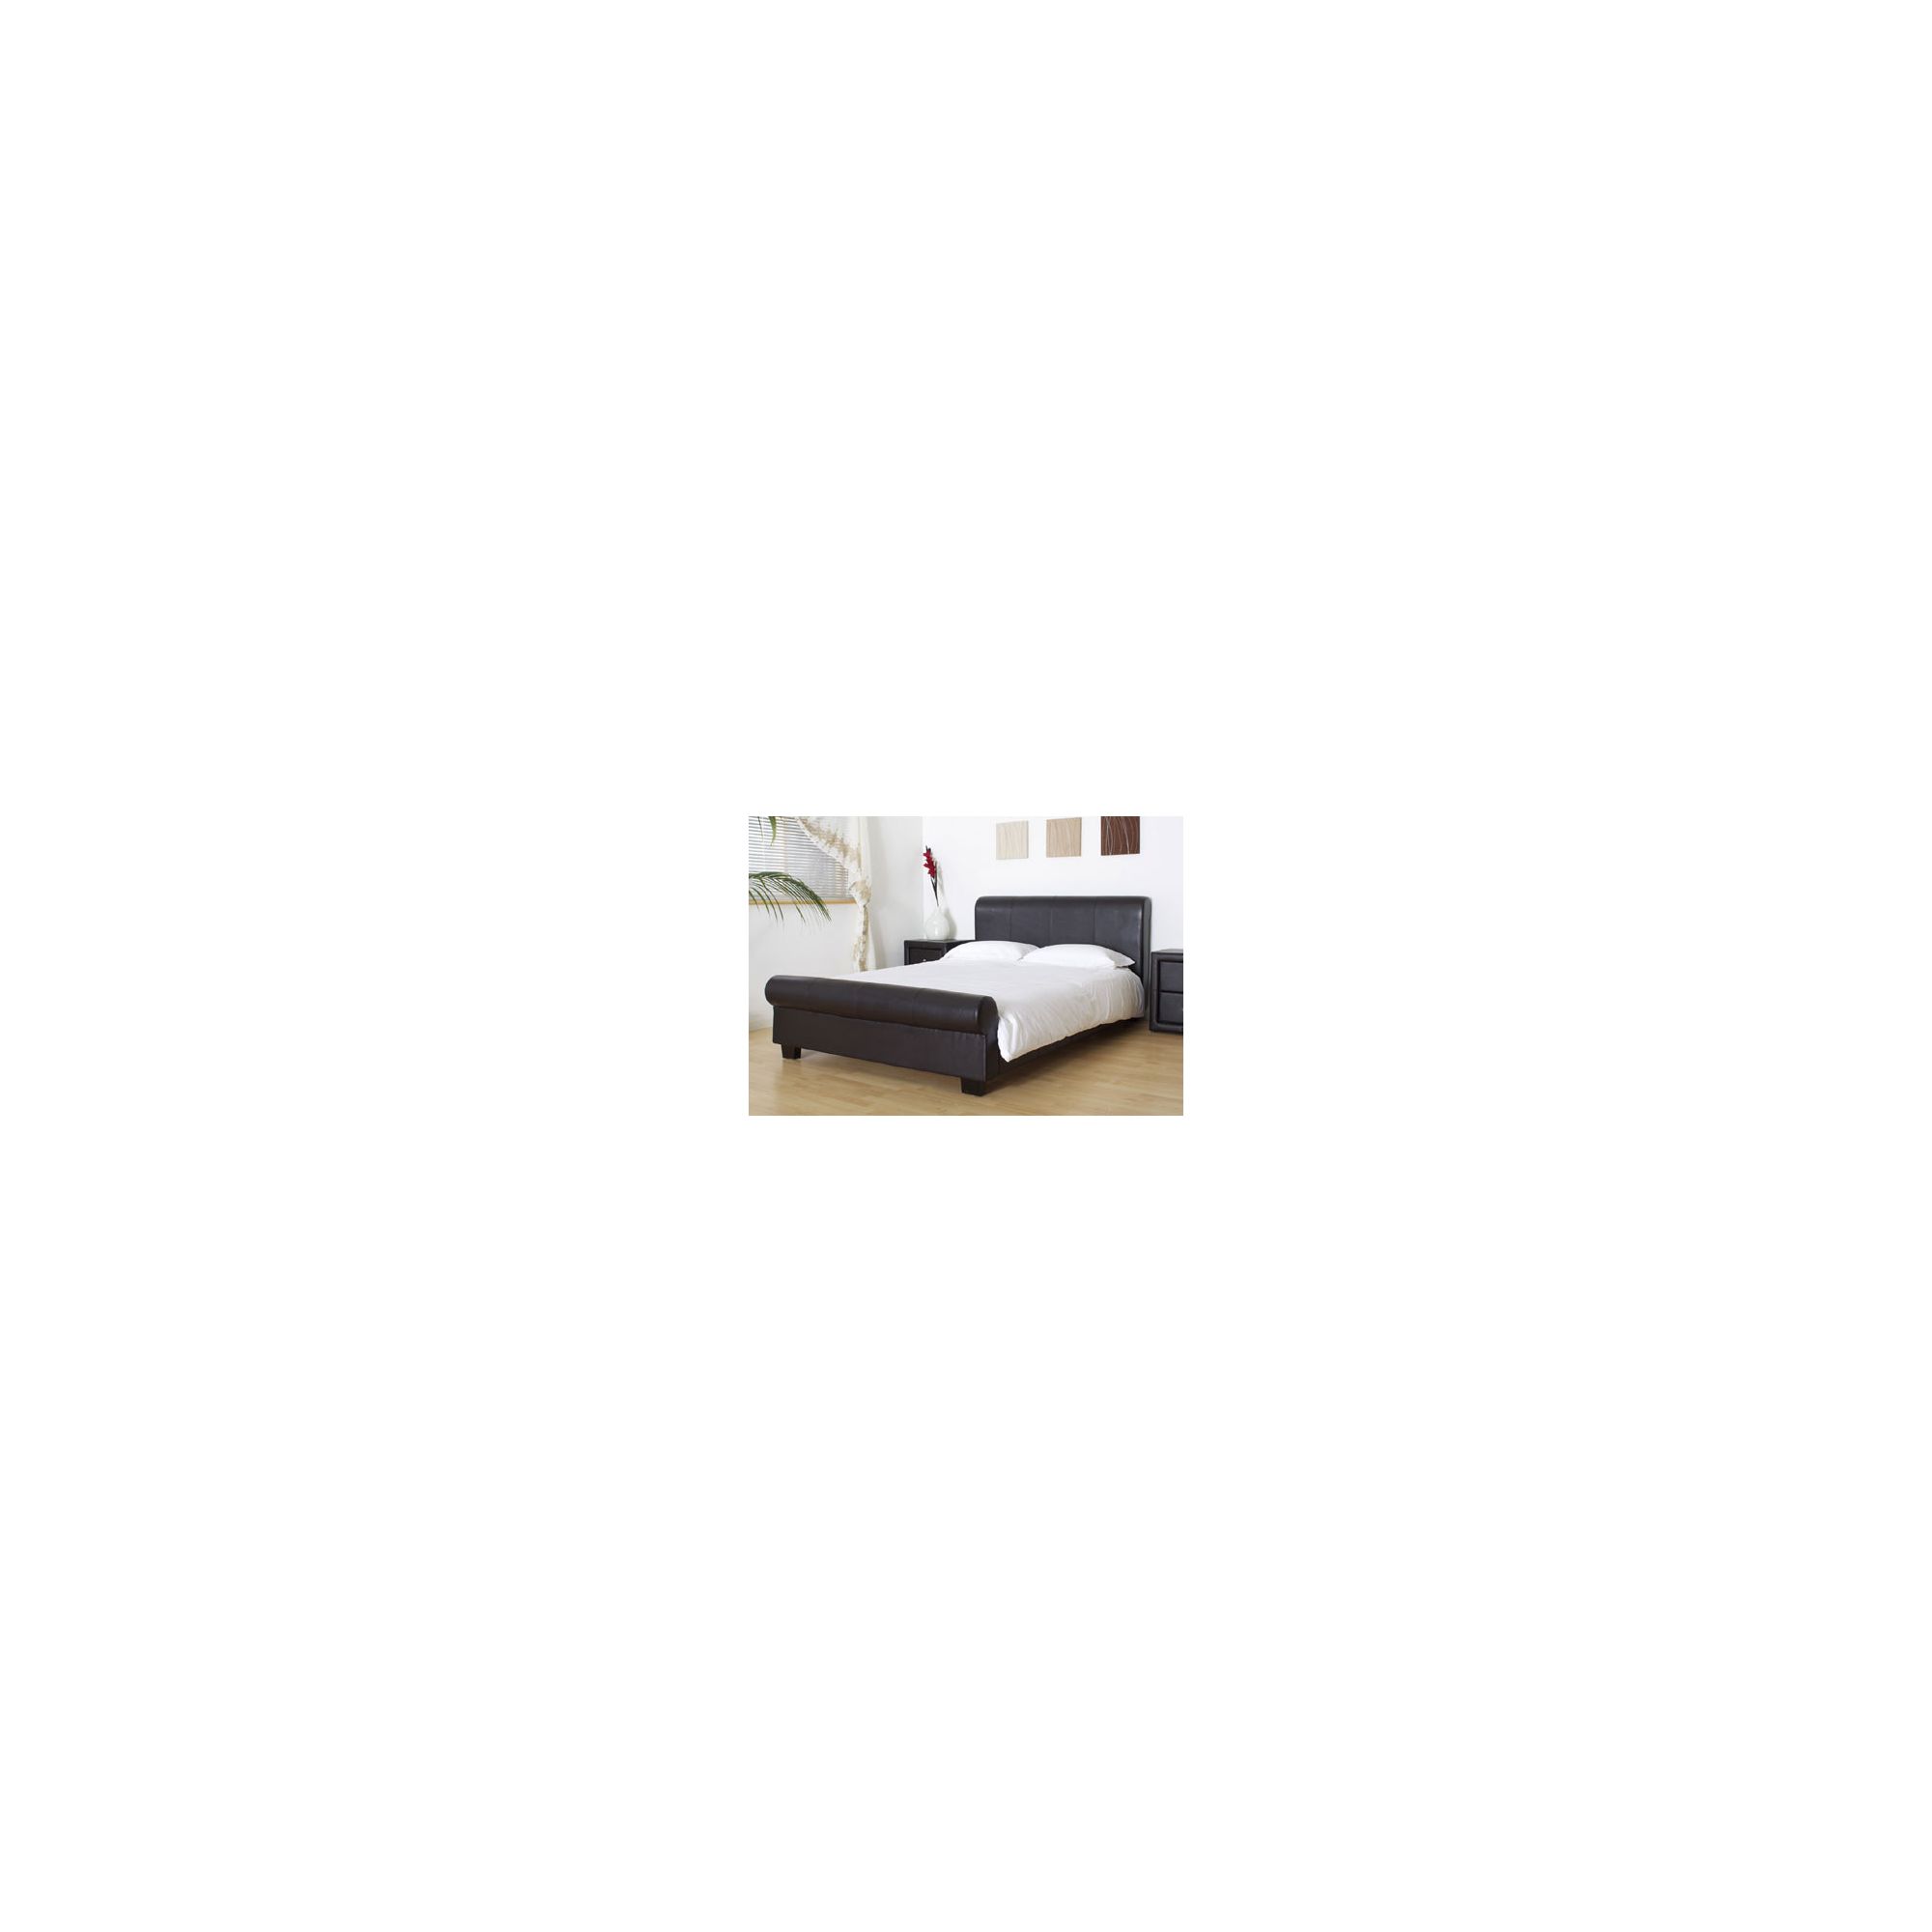 Alpha furniture Marseille Real Leather Bed - Black - Double at Tescos Direct